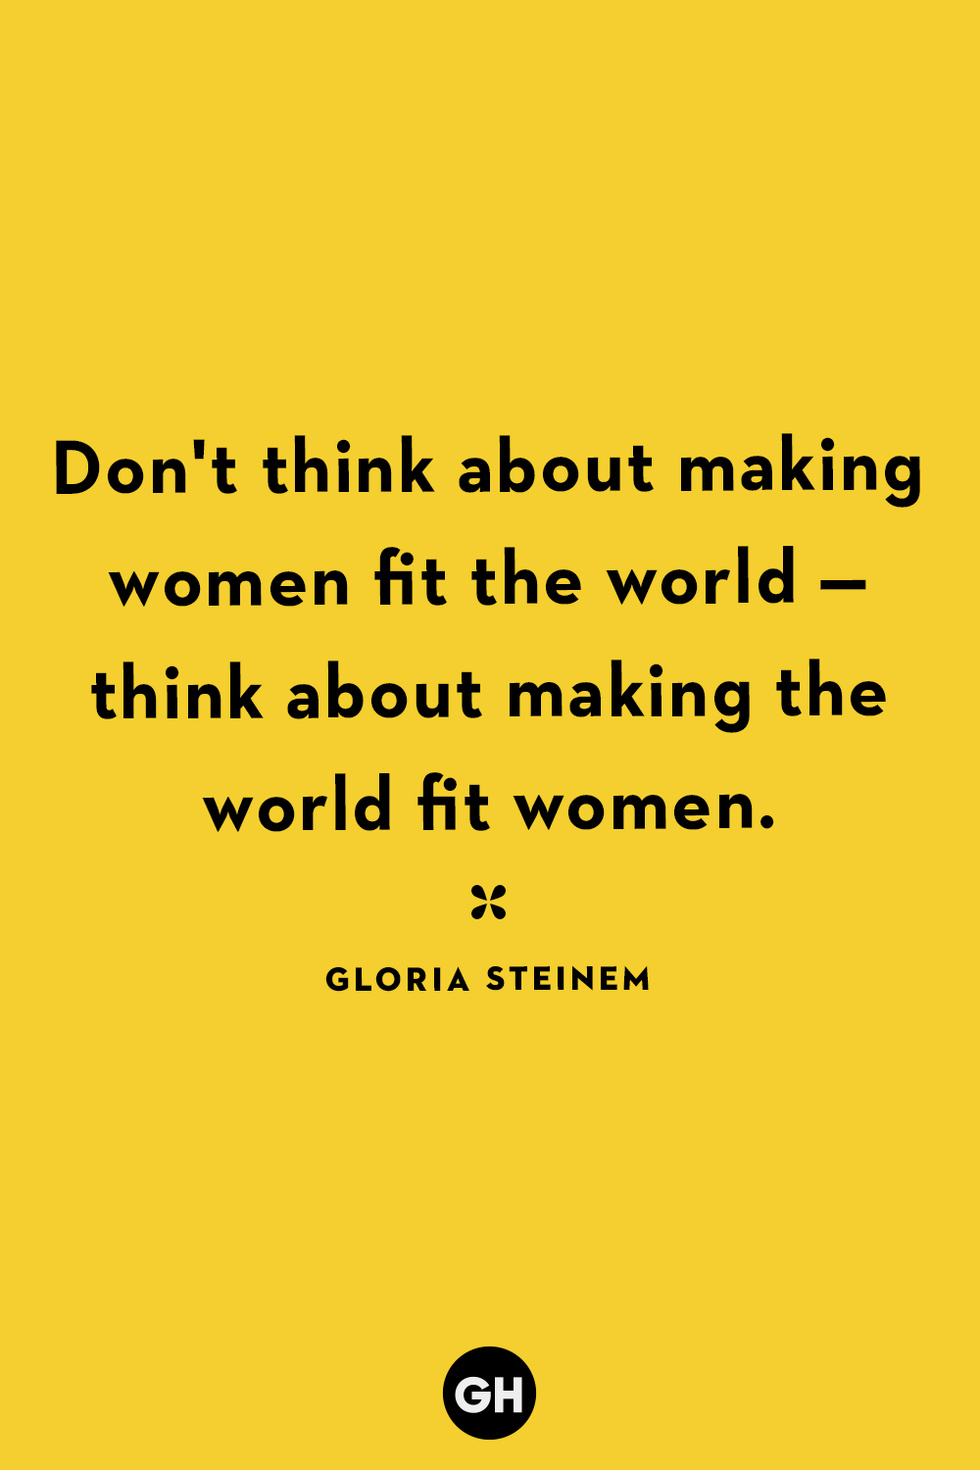 100 Inspirational Strong Women Quotes To Empower You ( With Pictures)